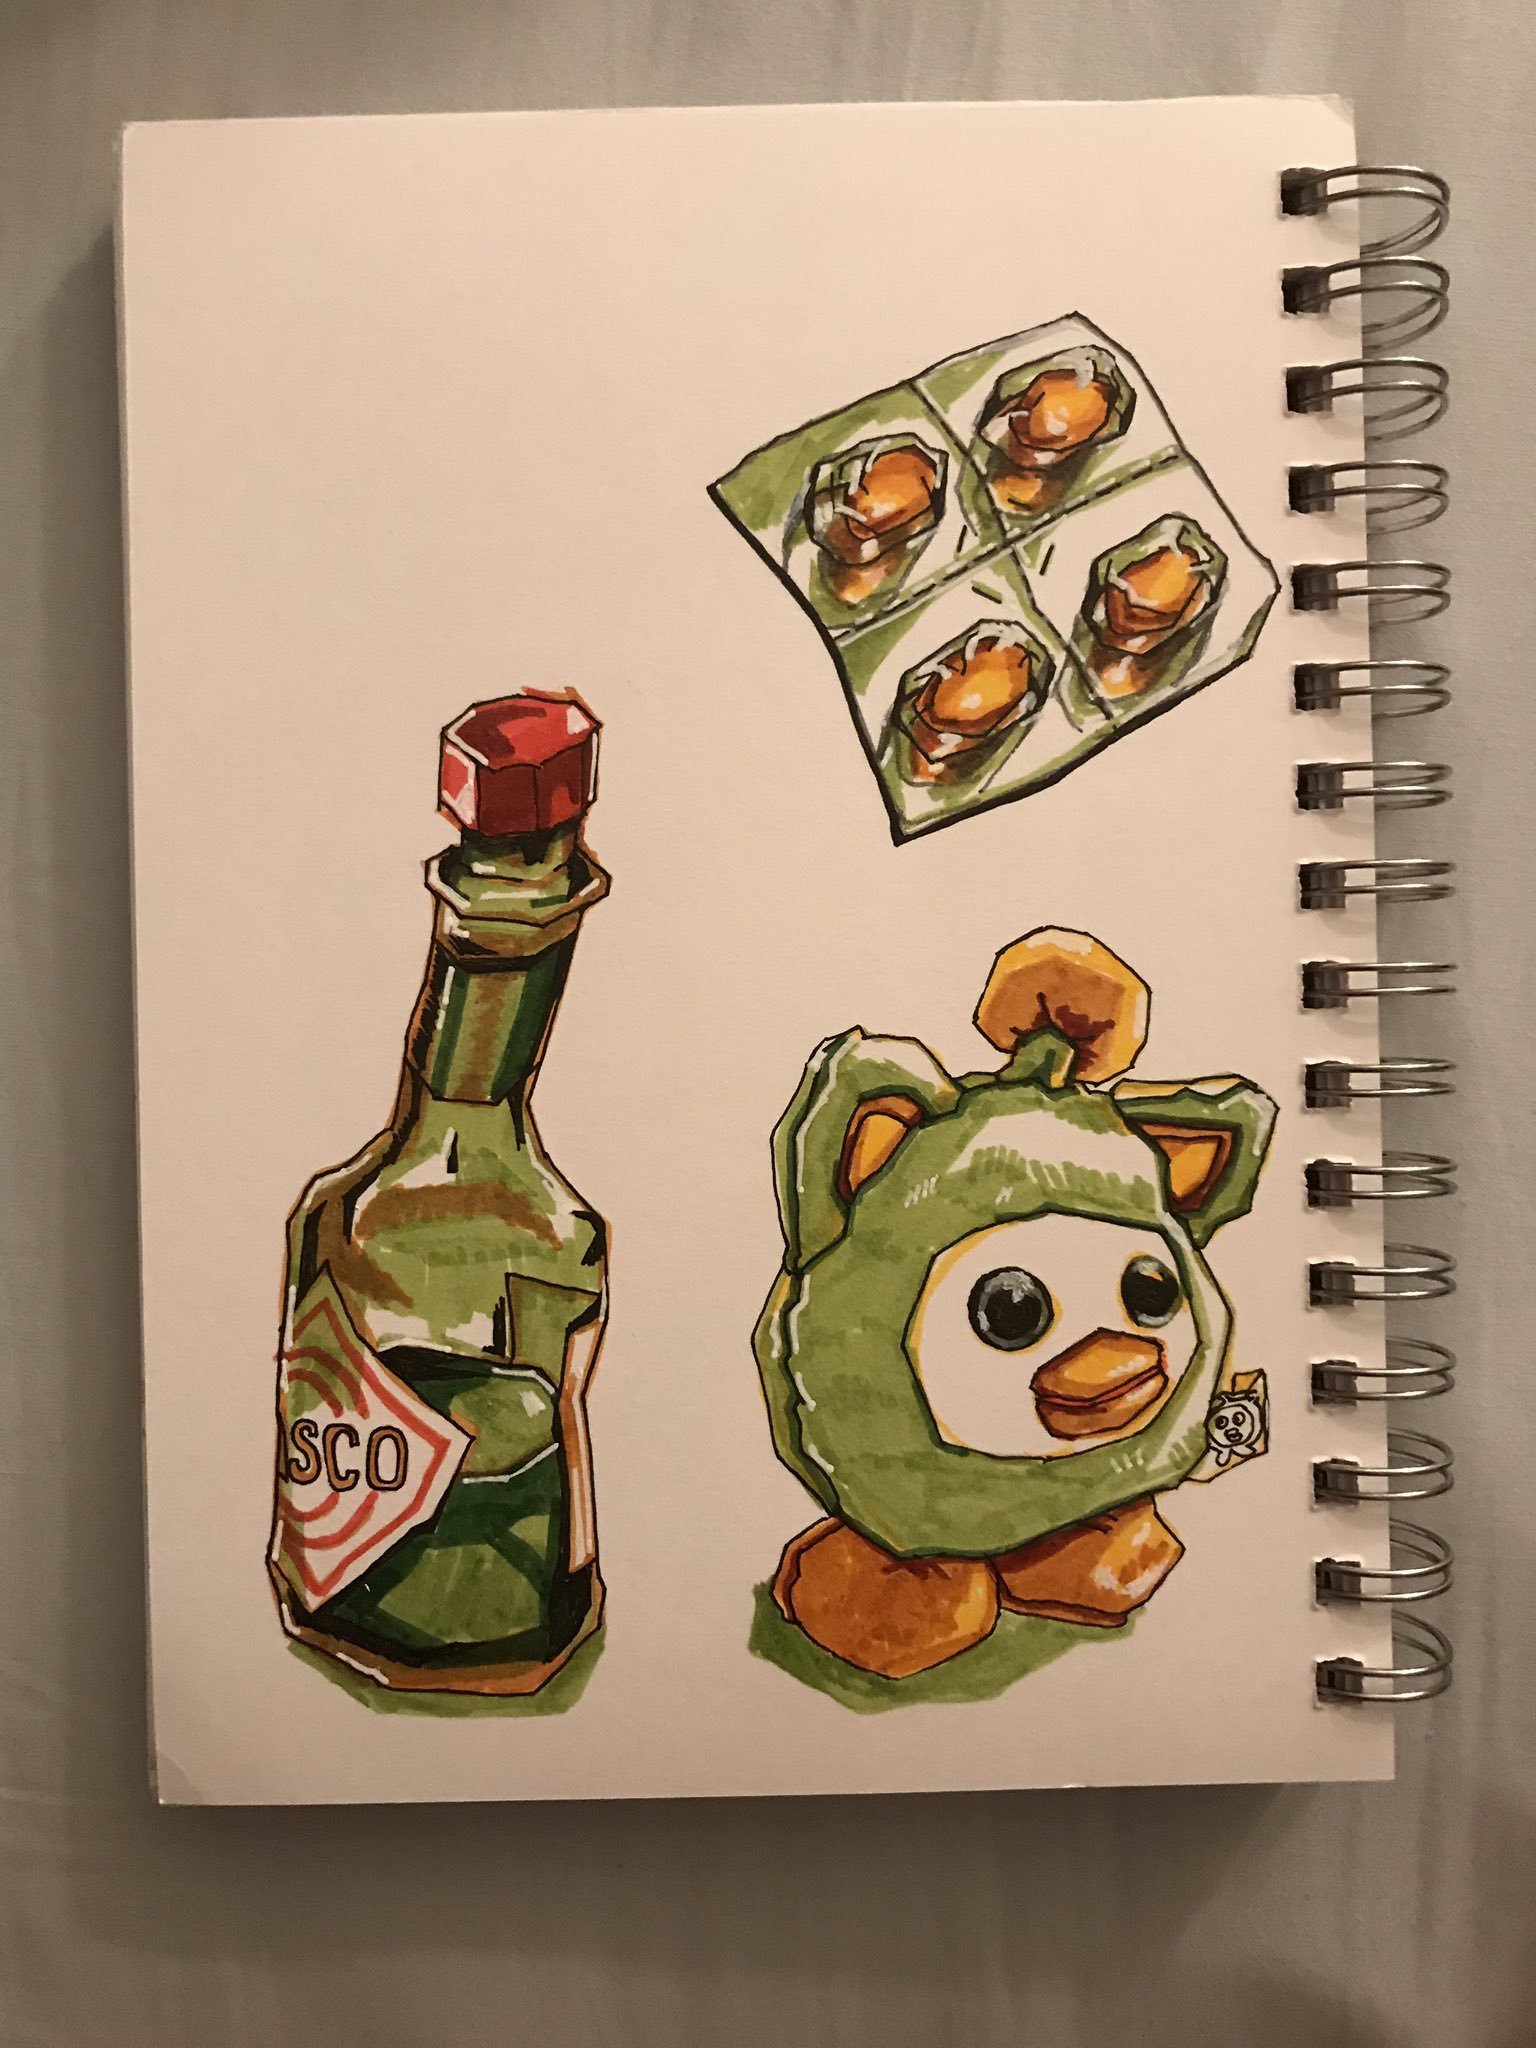 Photo of a sketchbook page with drawings of Tabasco, Advil tablets, and a Oui Oui stuffed animal